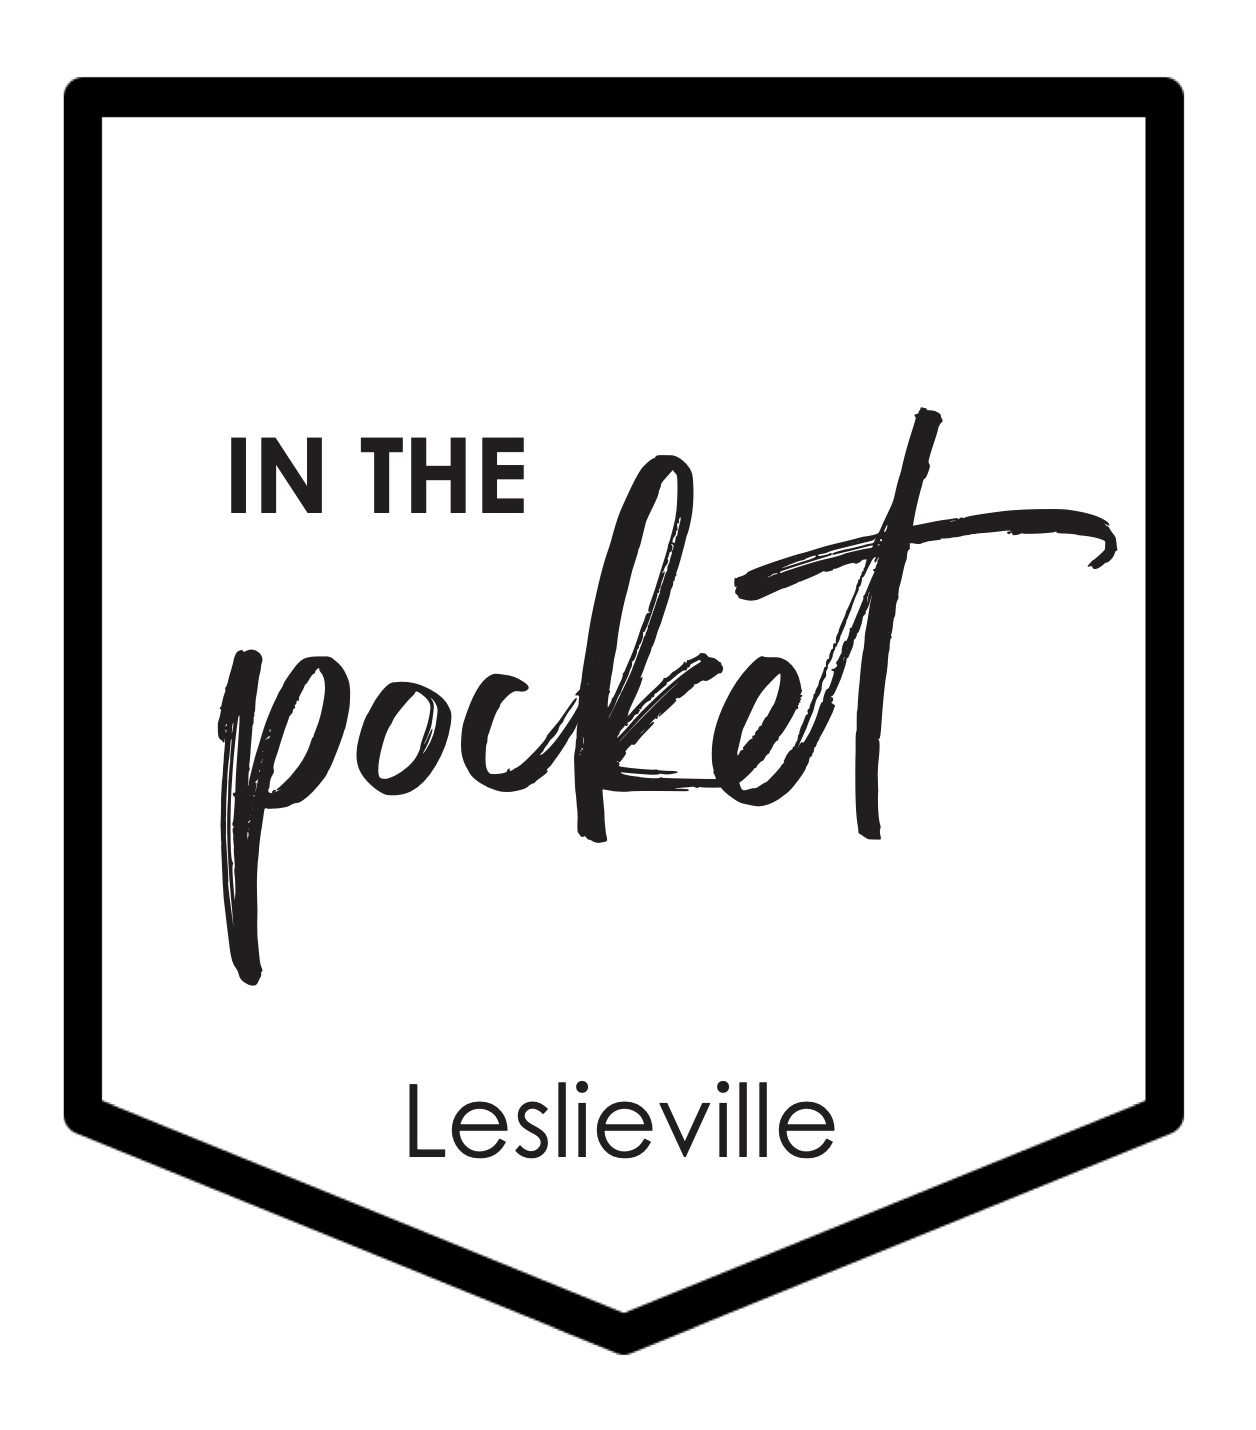 IN THE POCKET. Leslieville